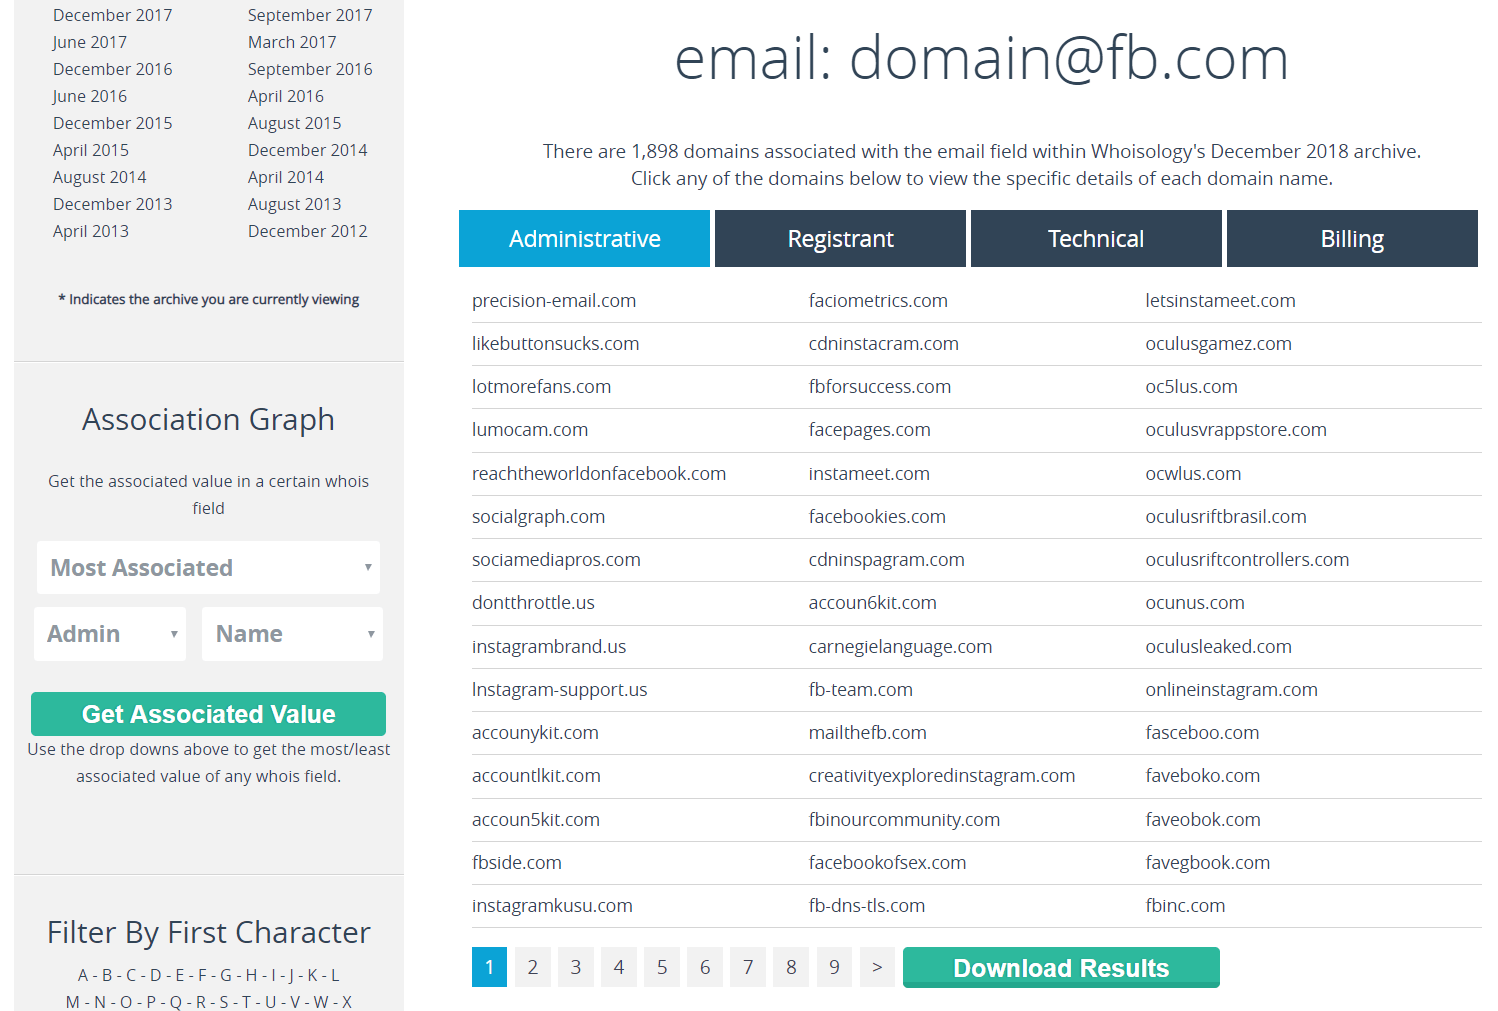 Our search for domain@fb.com shows all the domains that have connections with that specific email address.